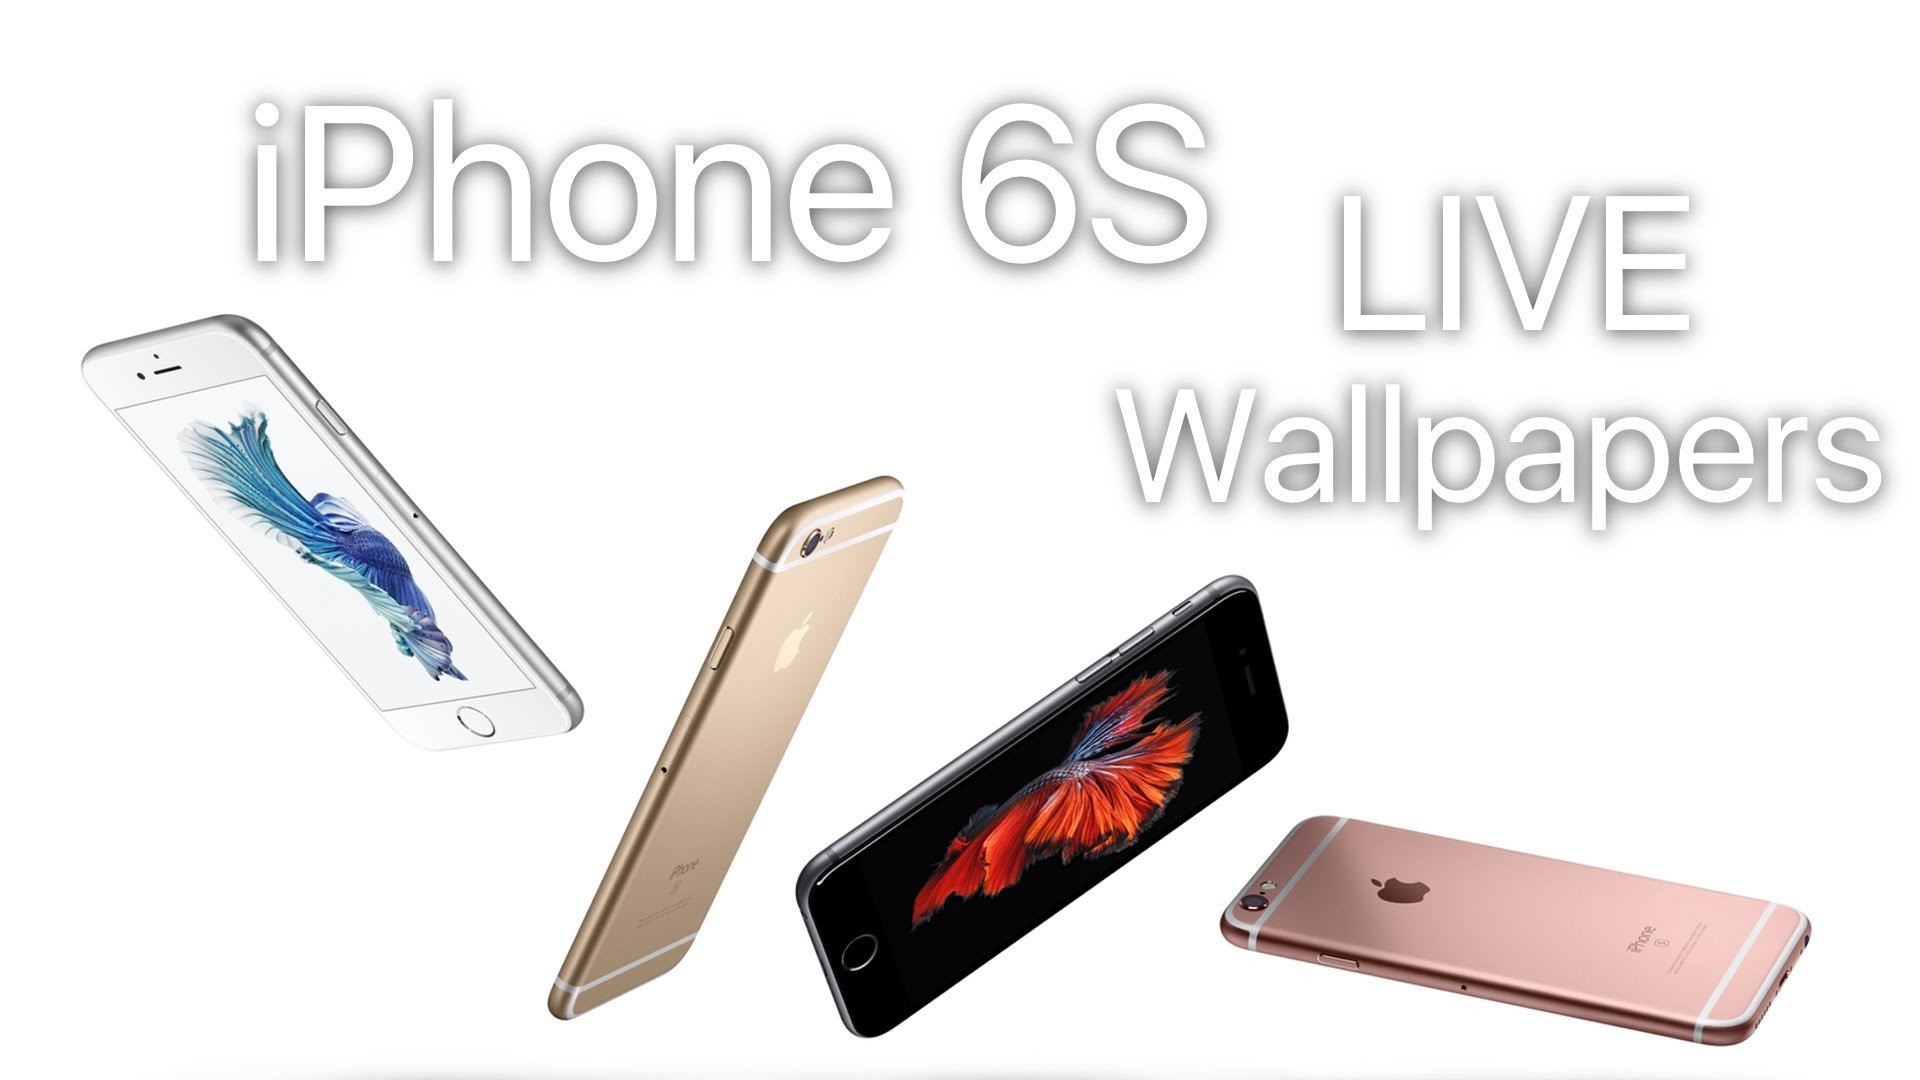 1920x1080 Get iPhone 6S LIVE WALLPAPERS on iOS 8 Devices - YouTube